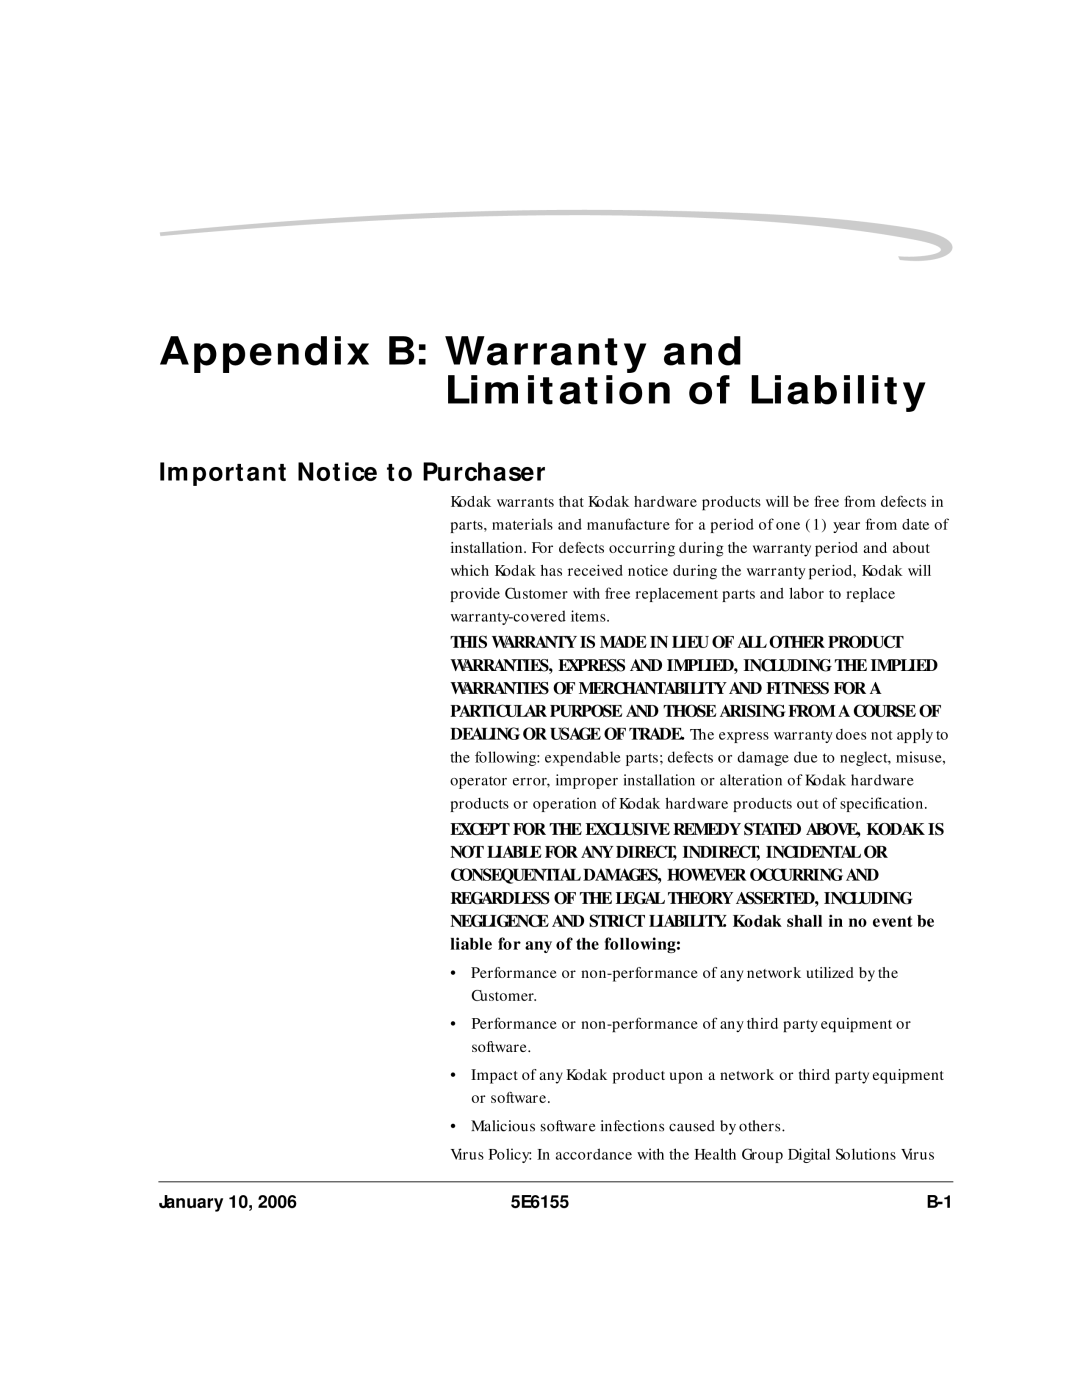 Kodak DryView 8900 manual Appendix B Warranty and Limitation of Liability, Important Notice to Purchaser 